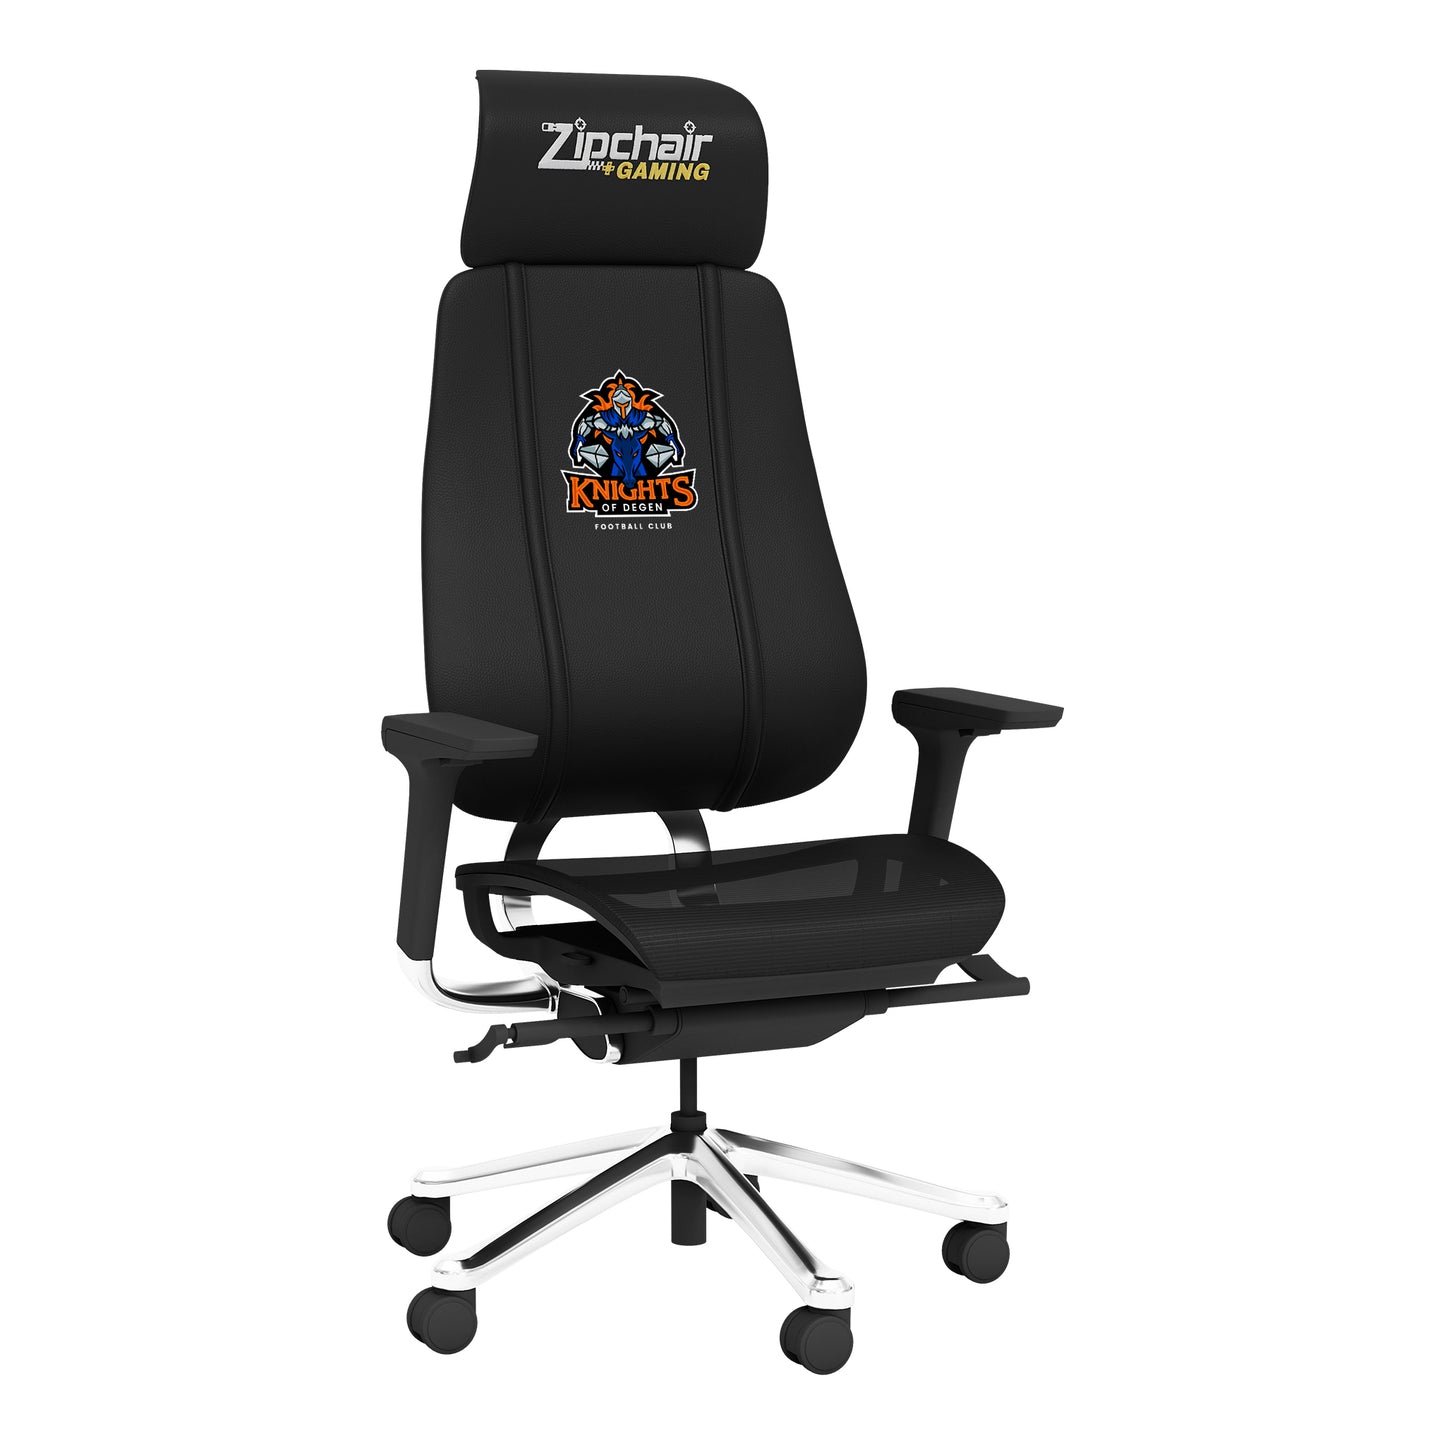 PhantomX Mesh Gaming Chair with Knights of Degen Primary Logo